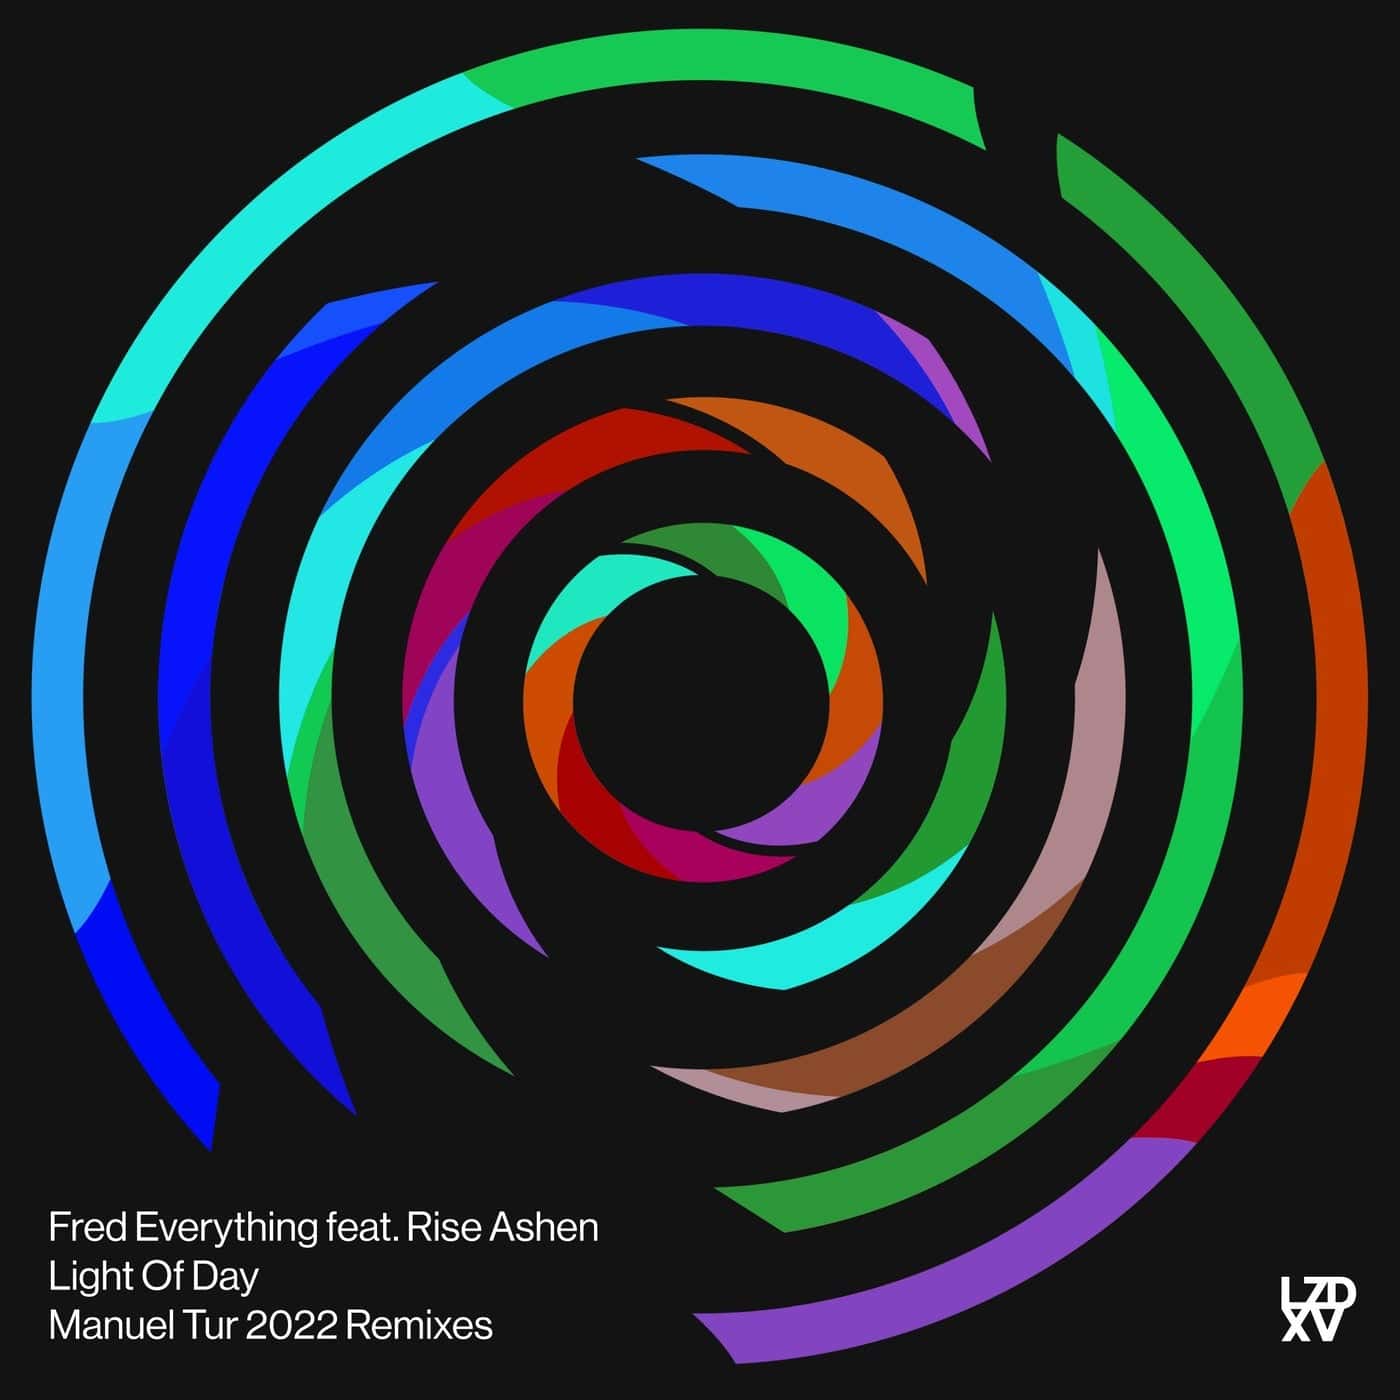 image cover: Fred Everything, Rise Ashen - Light Of Day (Manuel Tur 2022 Remixes) / LZD095